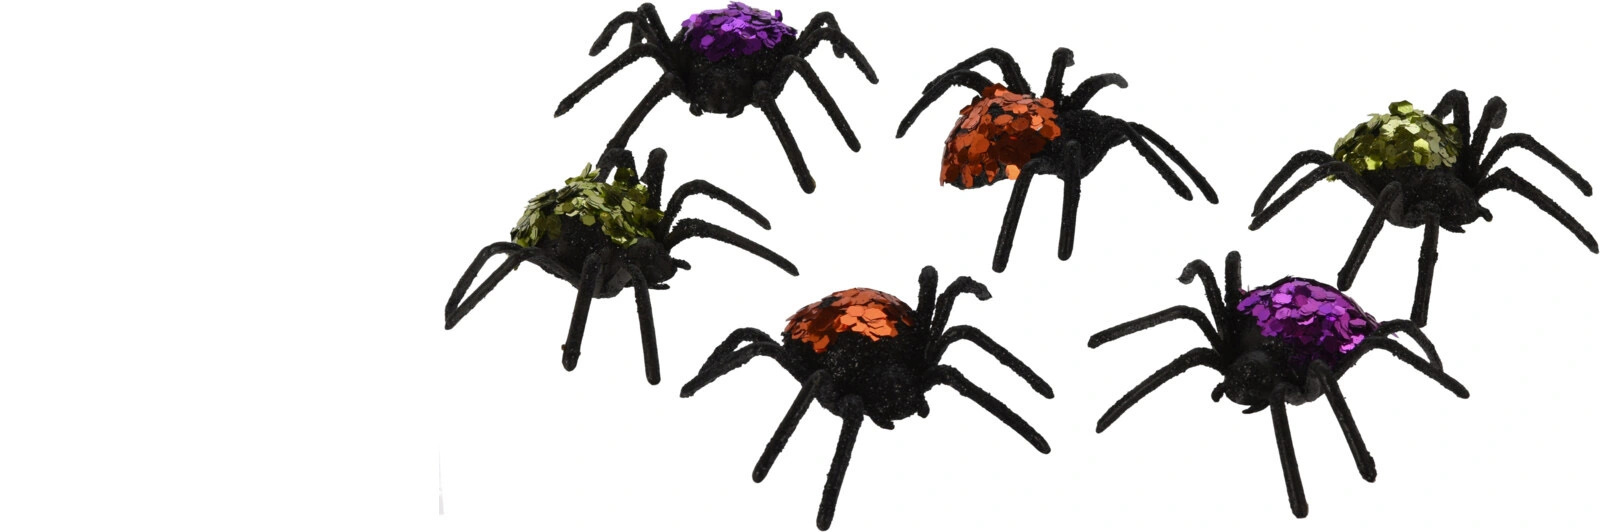 Spiders Set 6Pcs With Sequins - Nampook